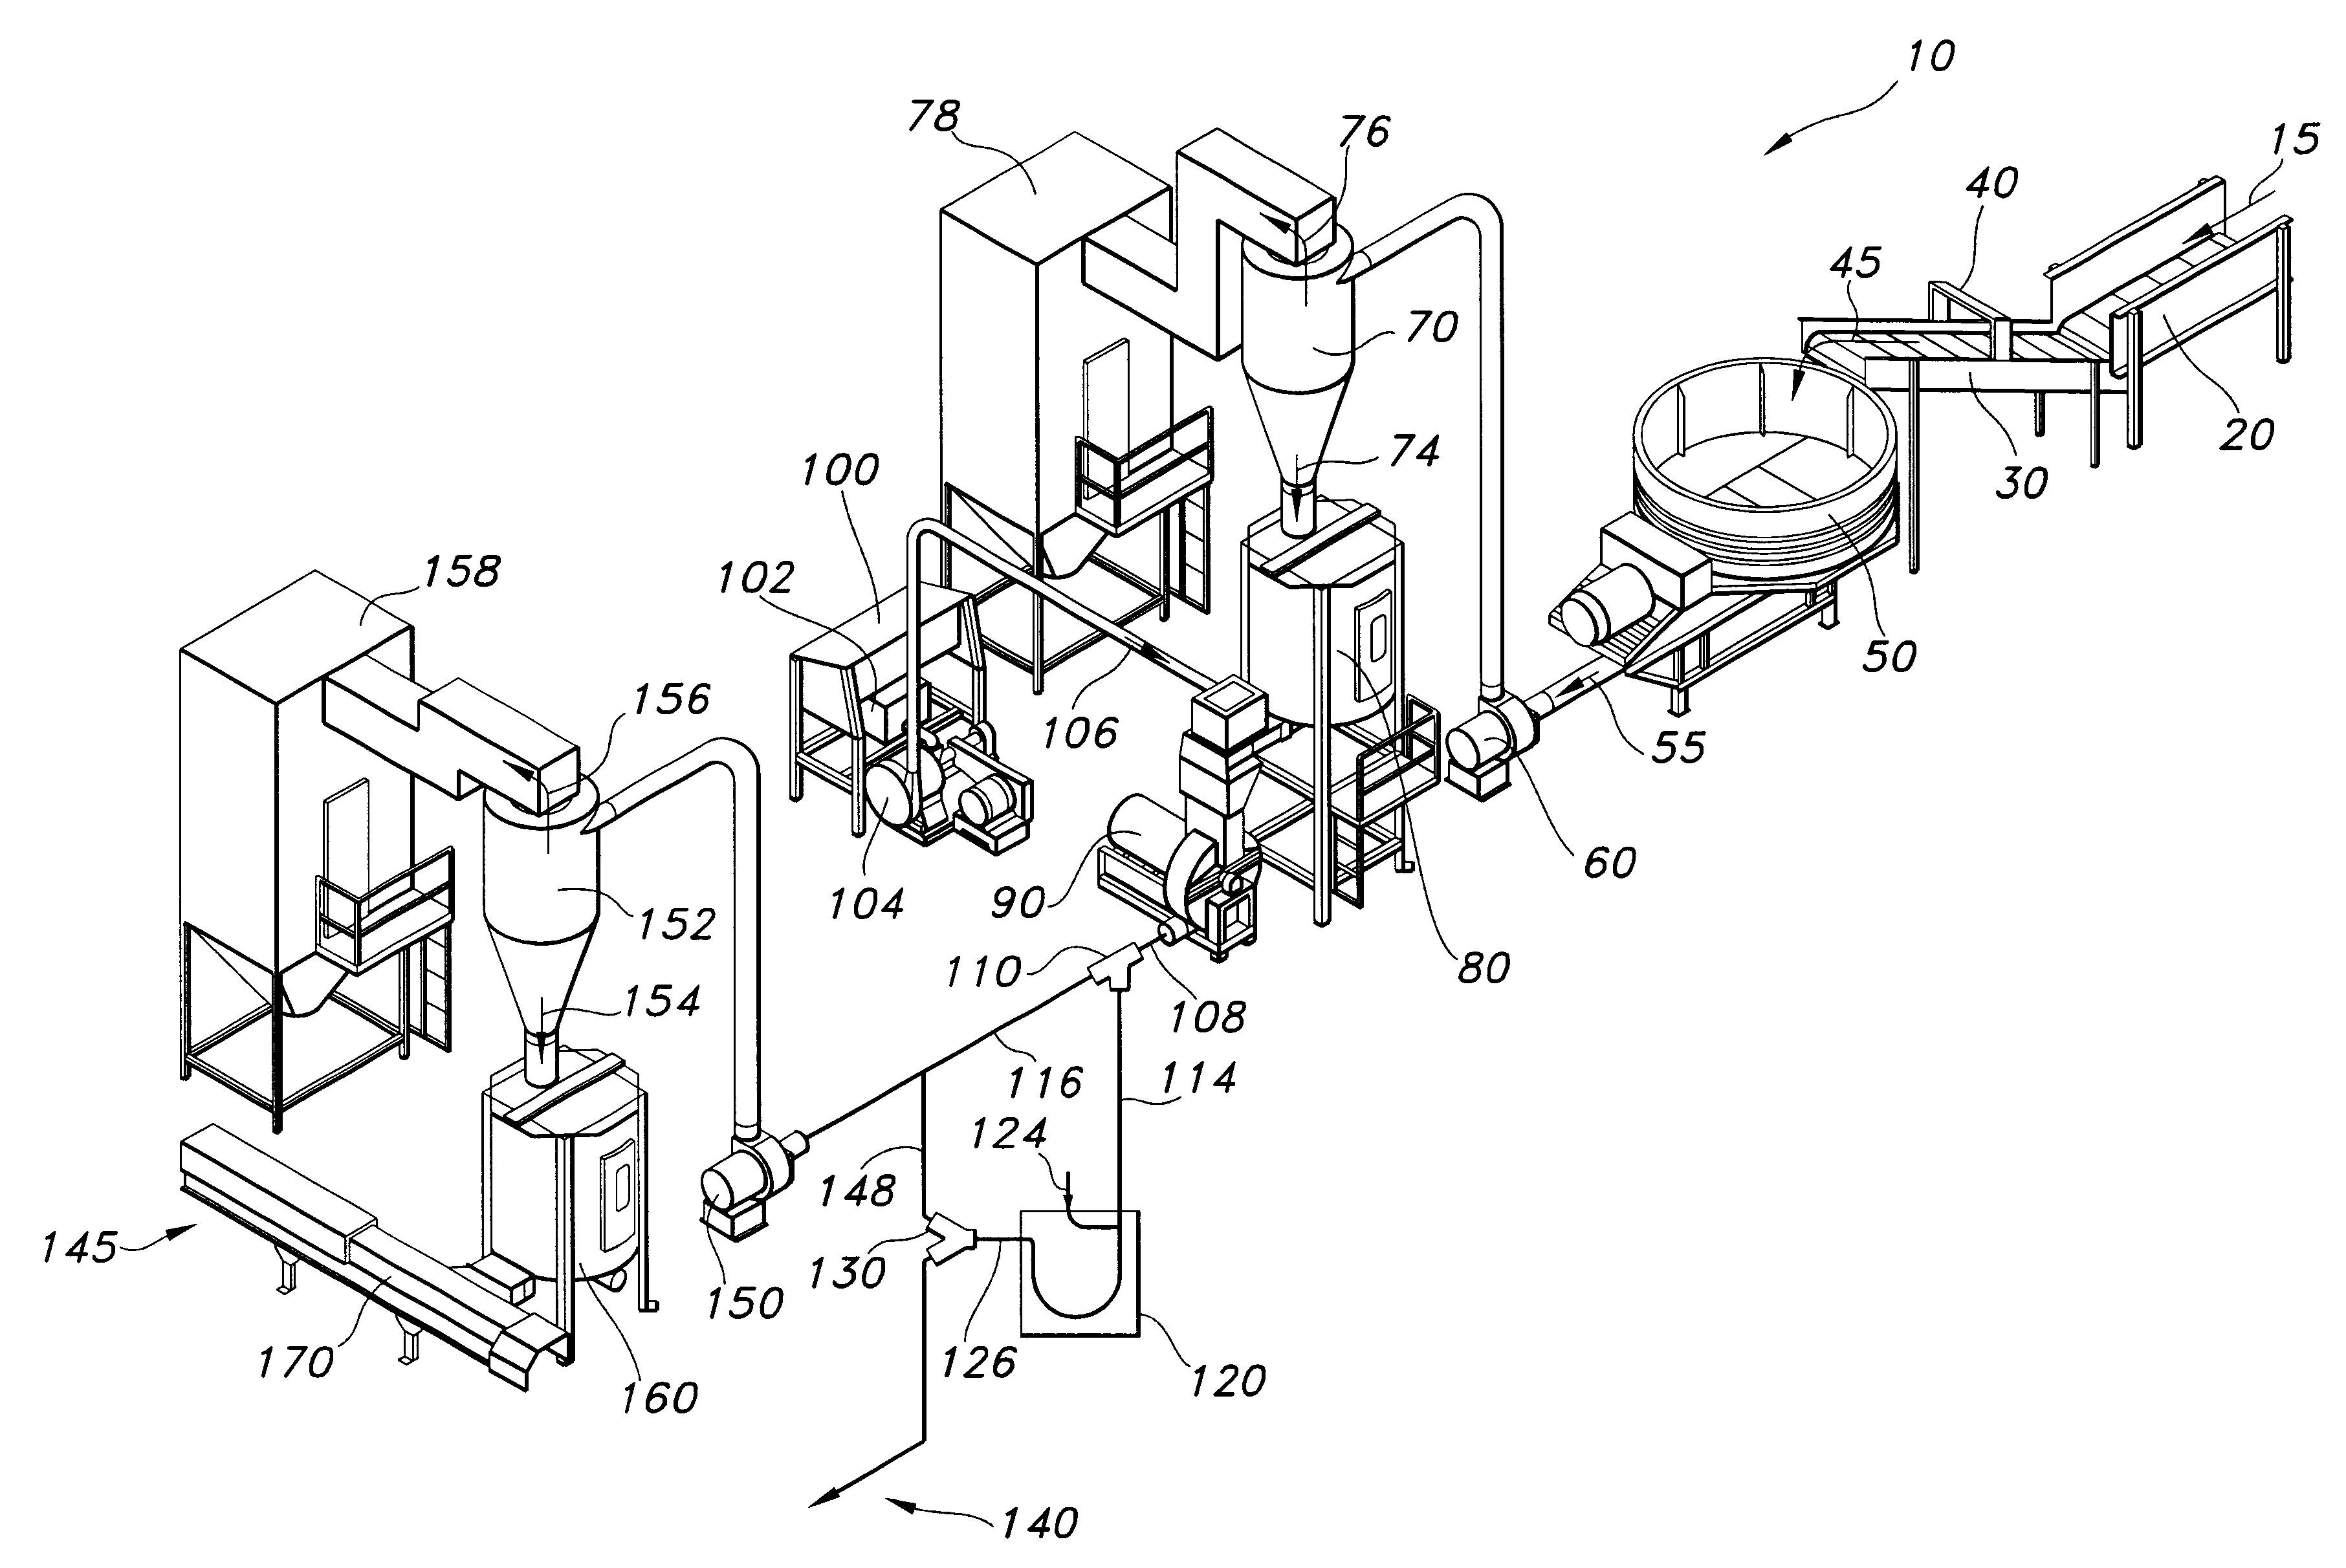 Method and system for producing prescription animal bedding from recycled paper waste products